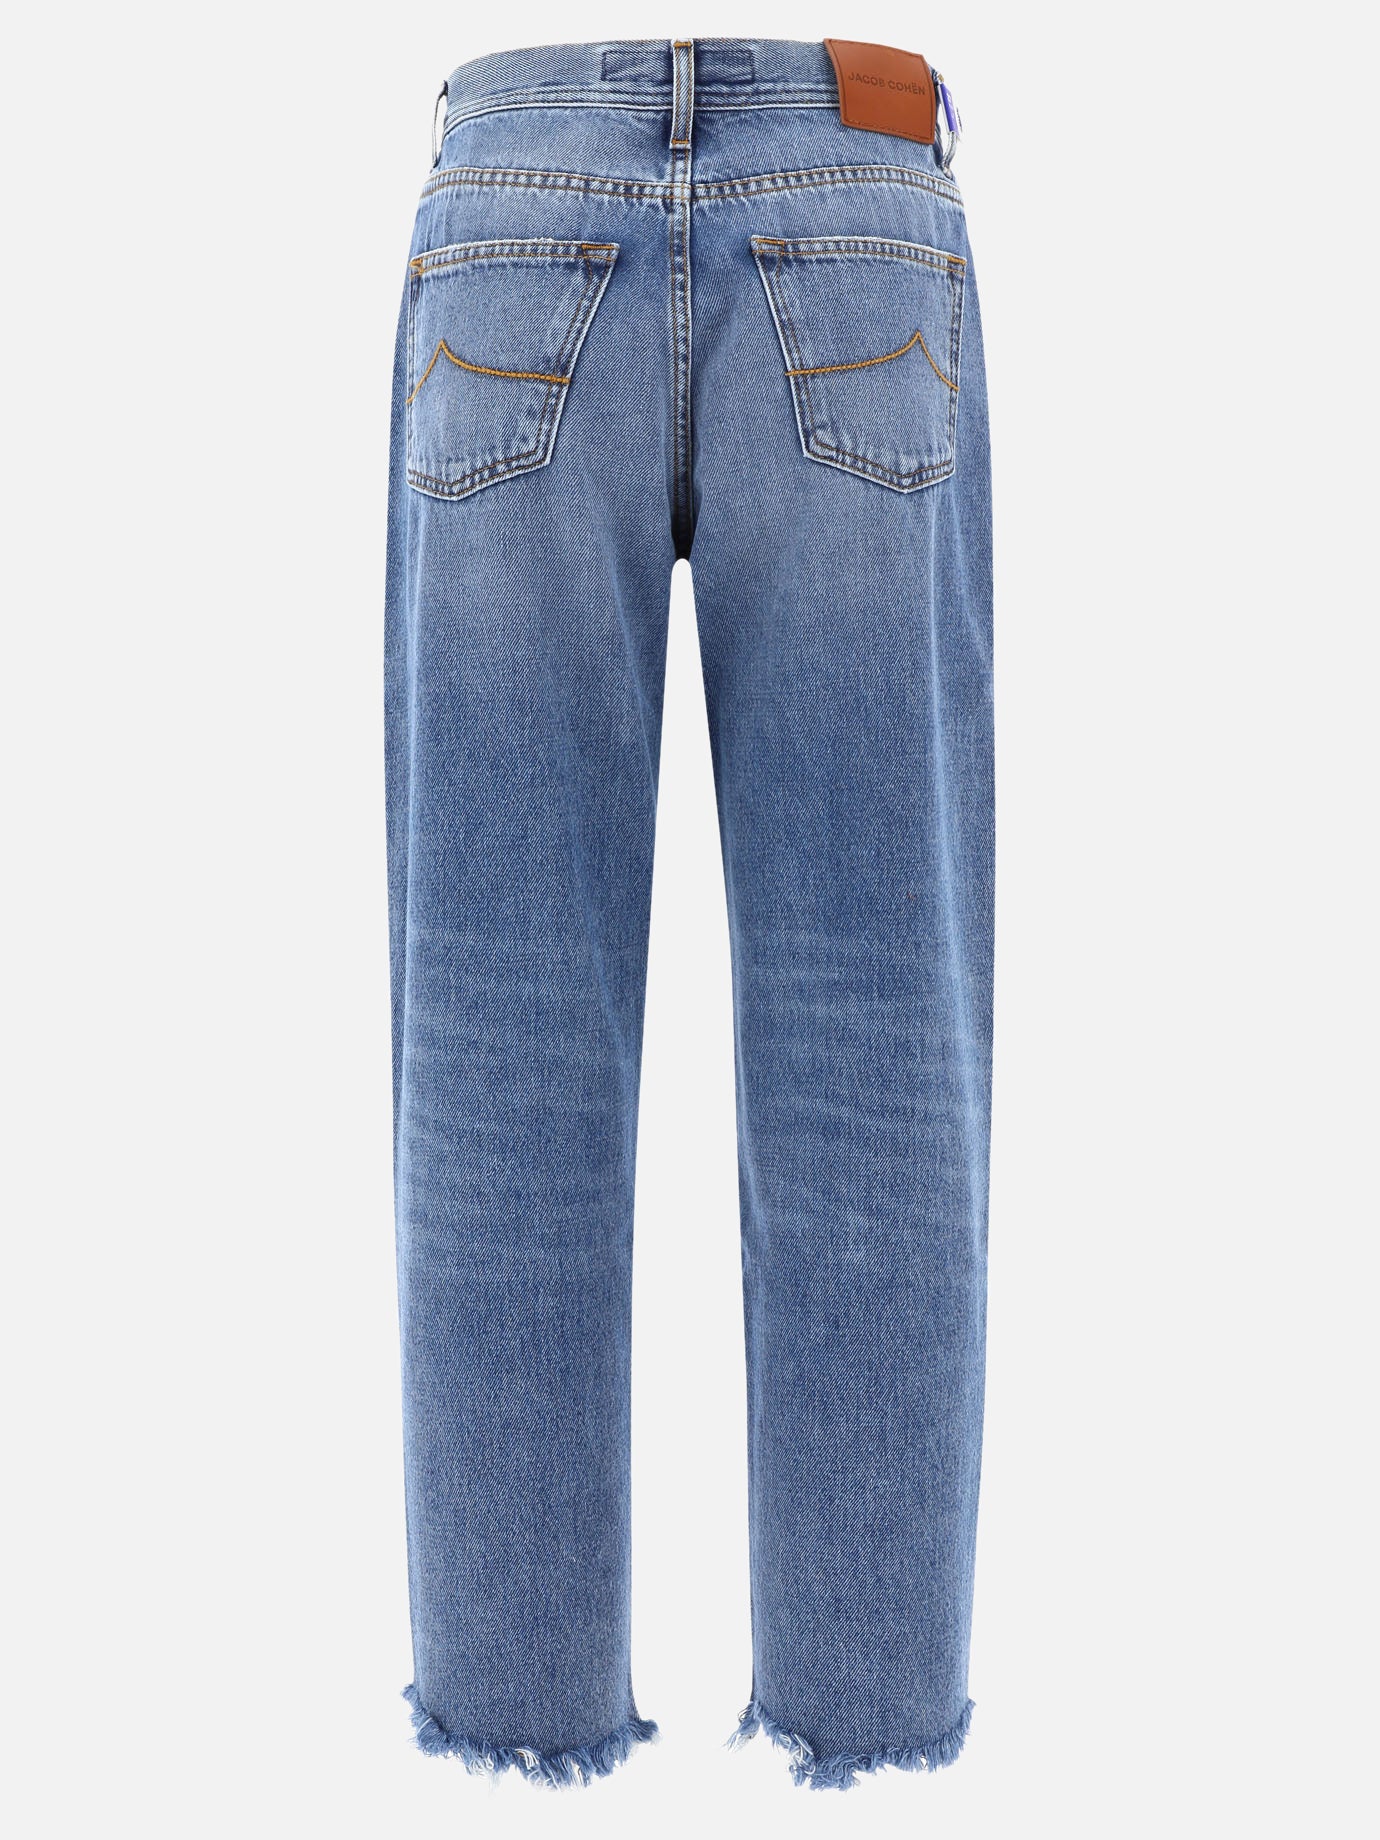 "Kendall" jeans